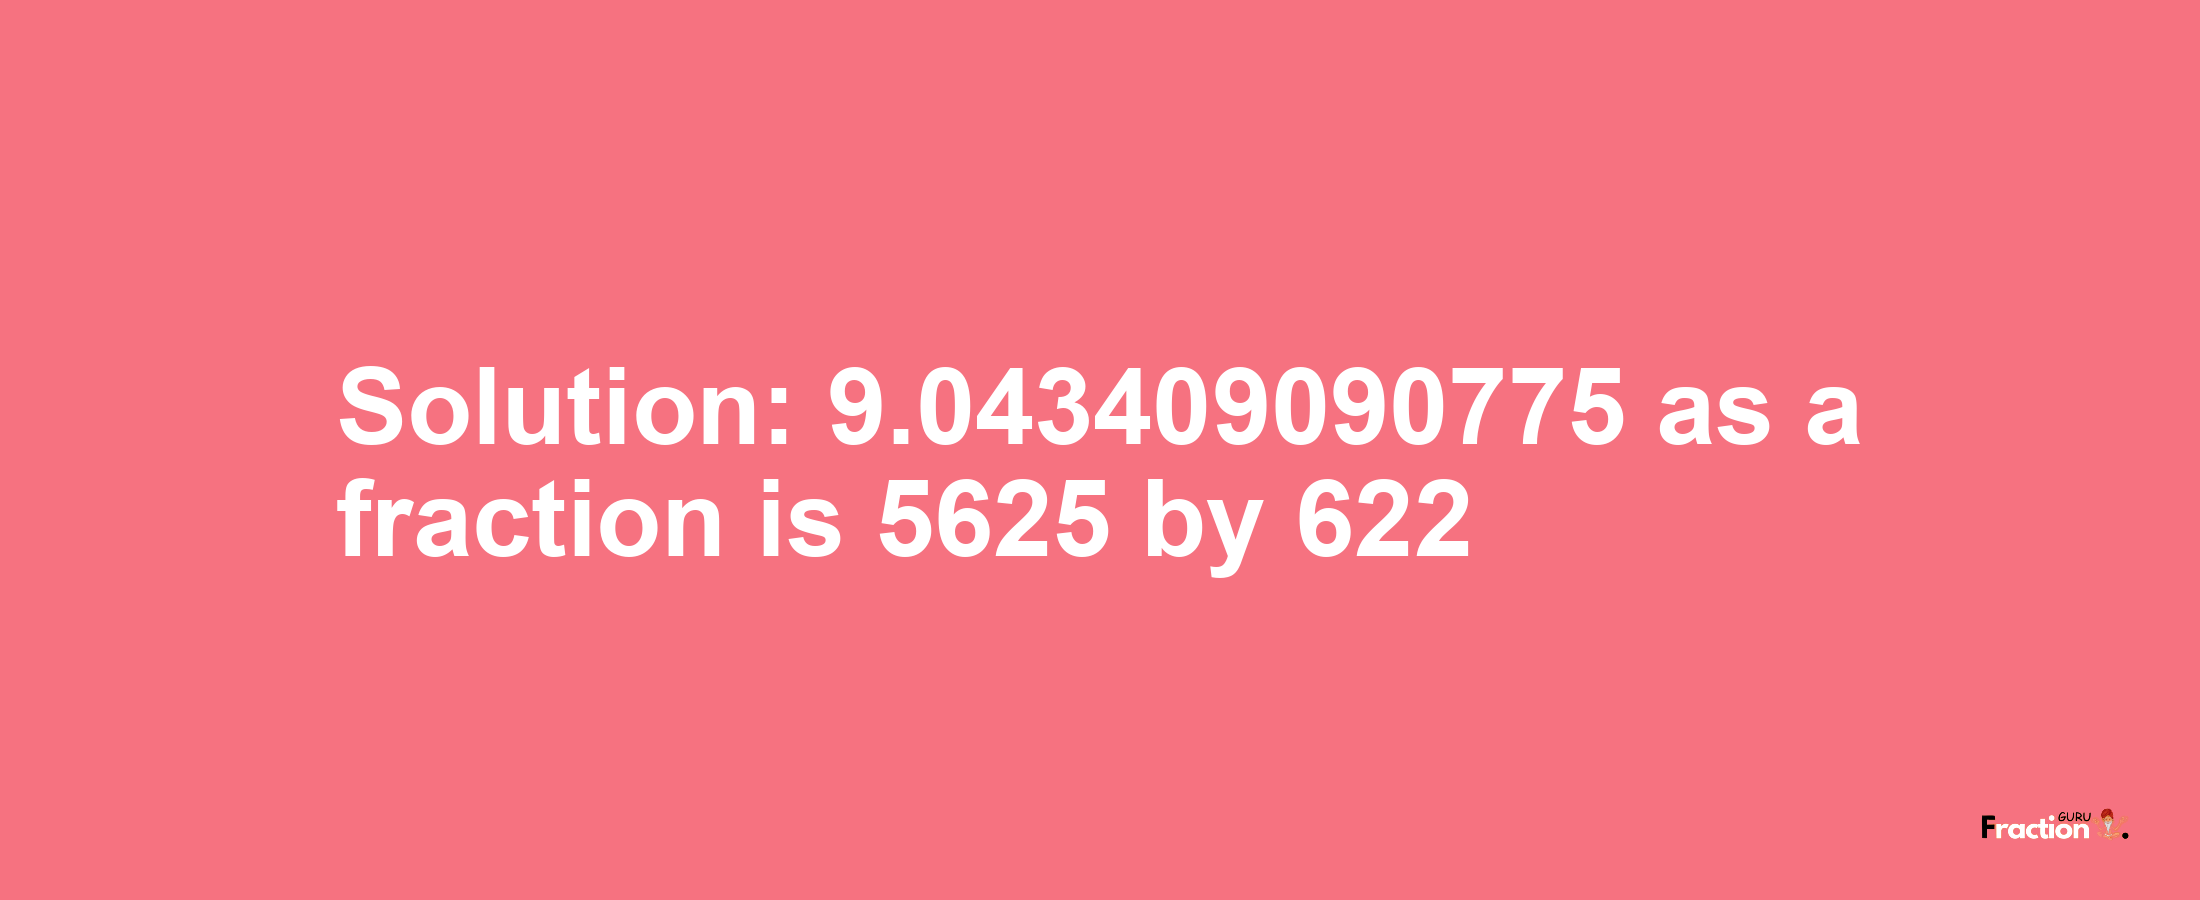 Solution:9.043409090775 as a fraction is 5625/622